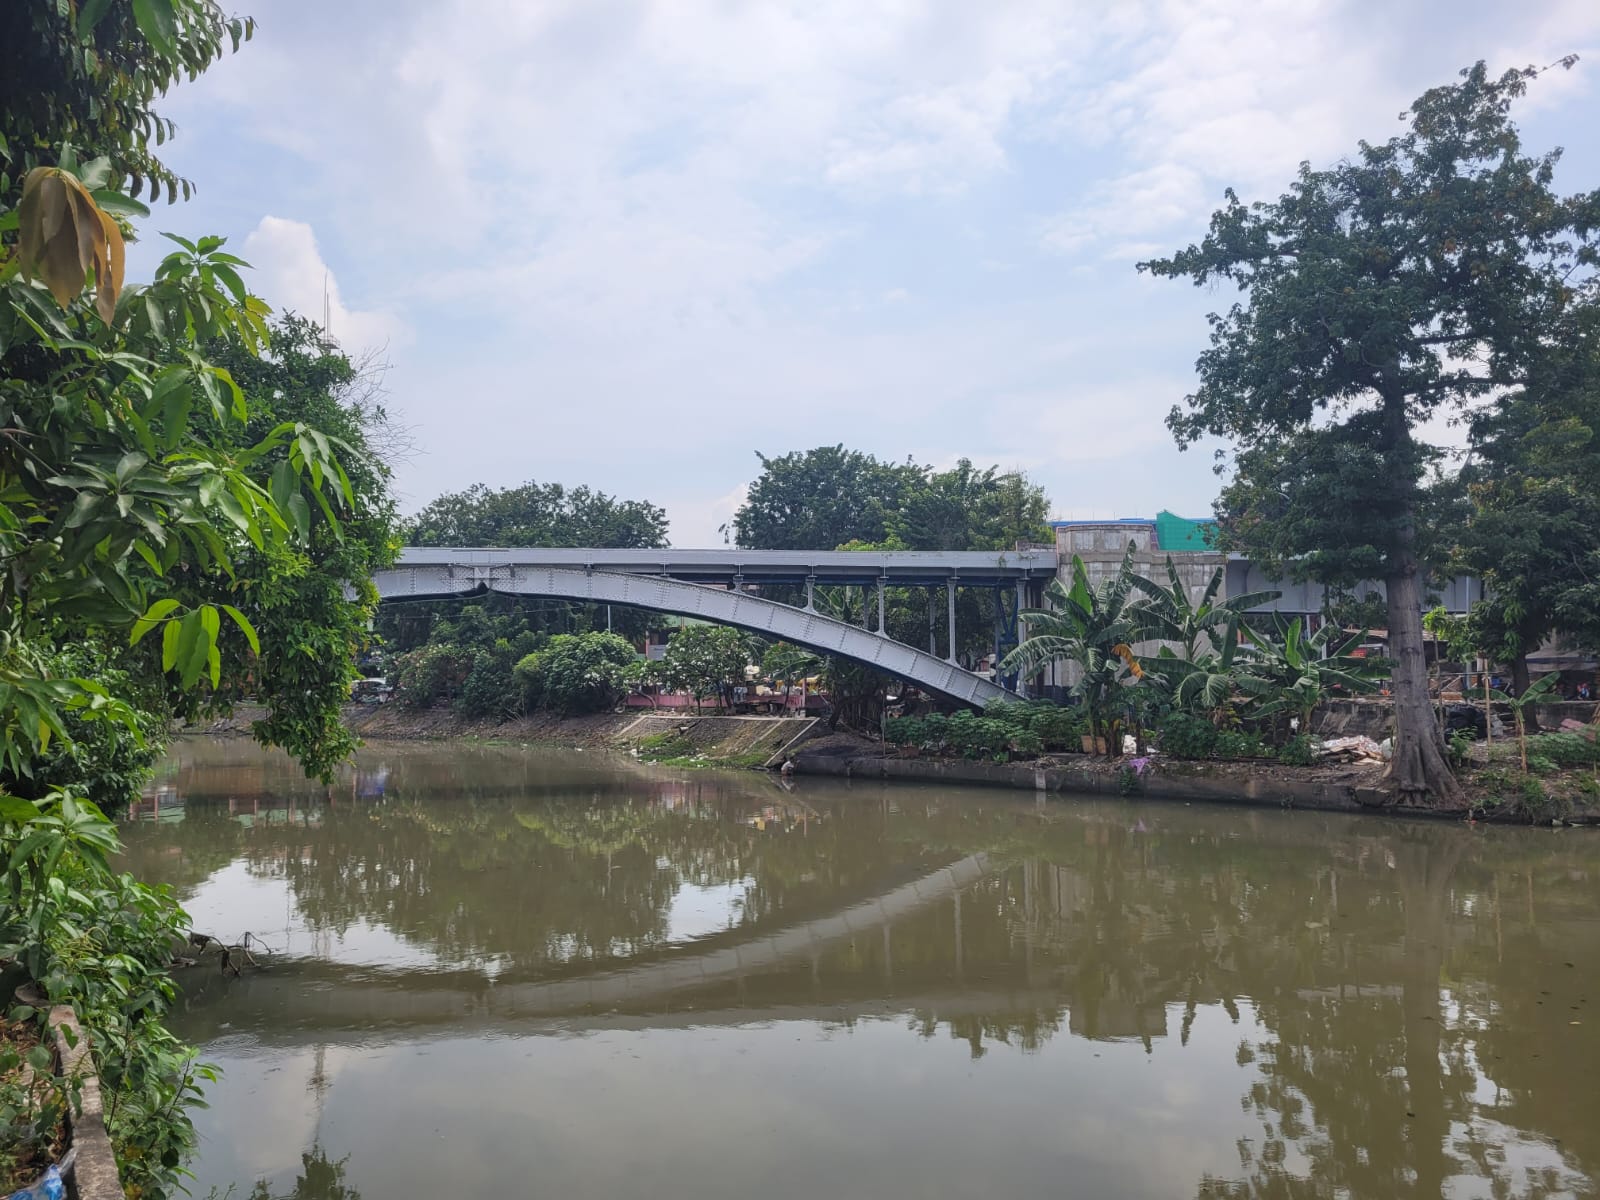 Viaduct Sulung